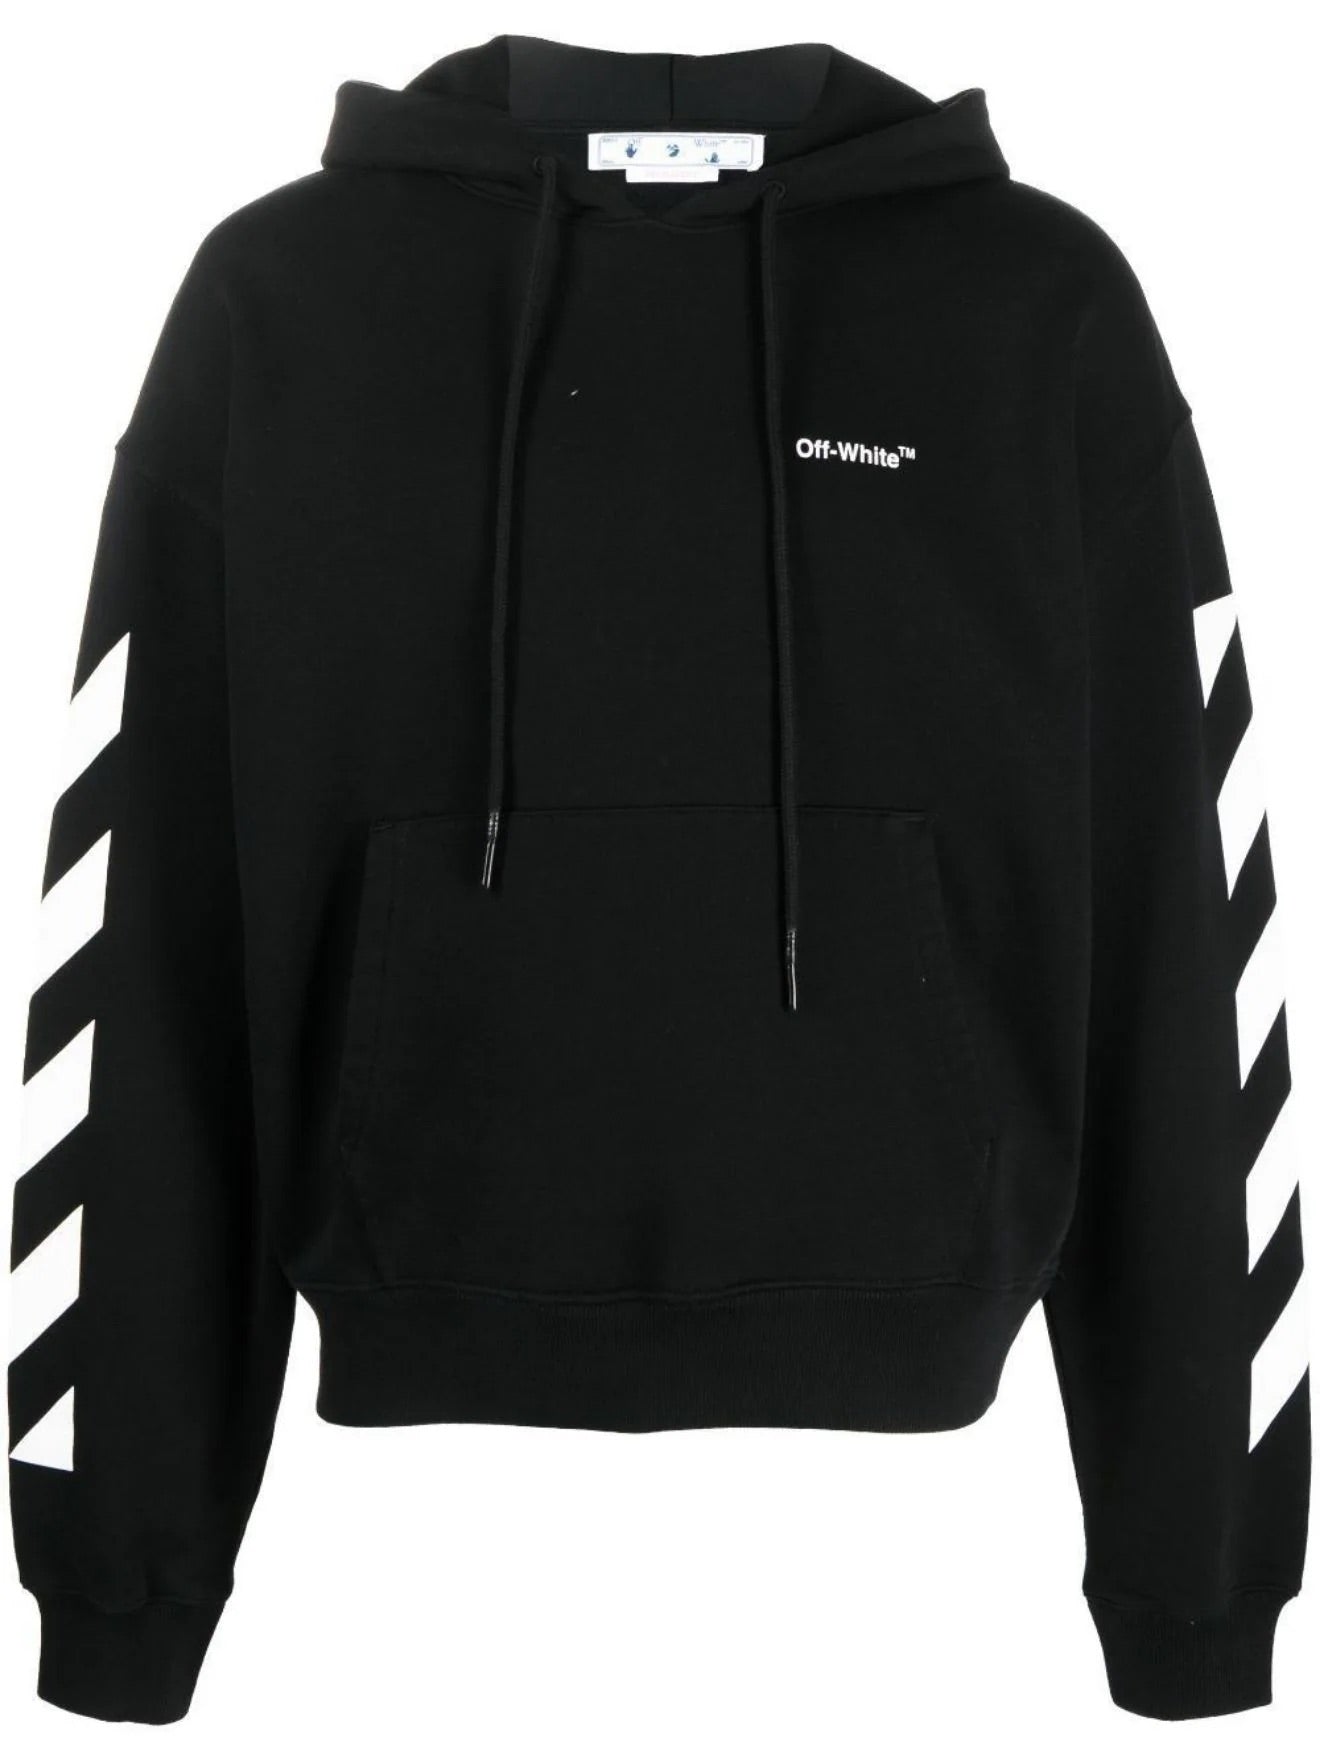 OFF-WHITE DIAG HELVETICA HOODIE – ONE OF A KIND